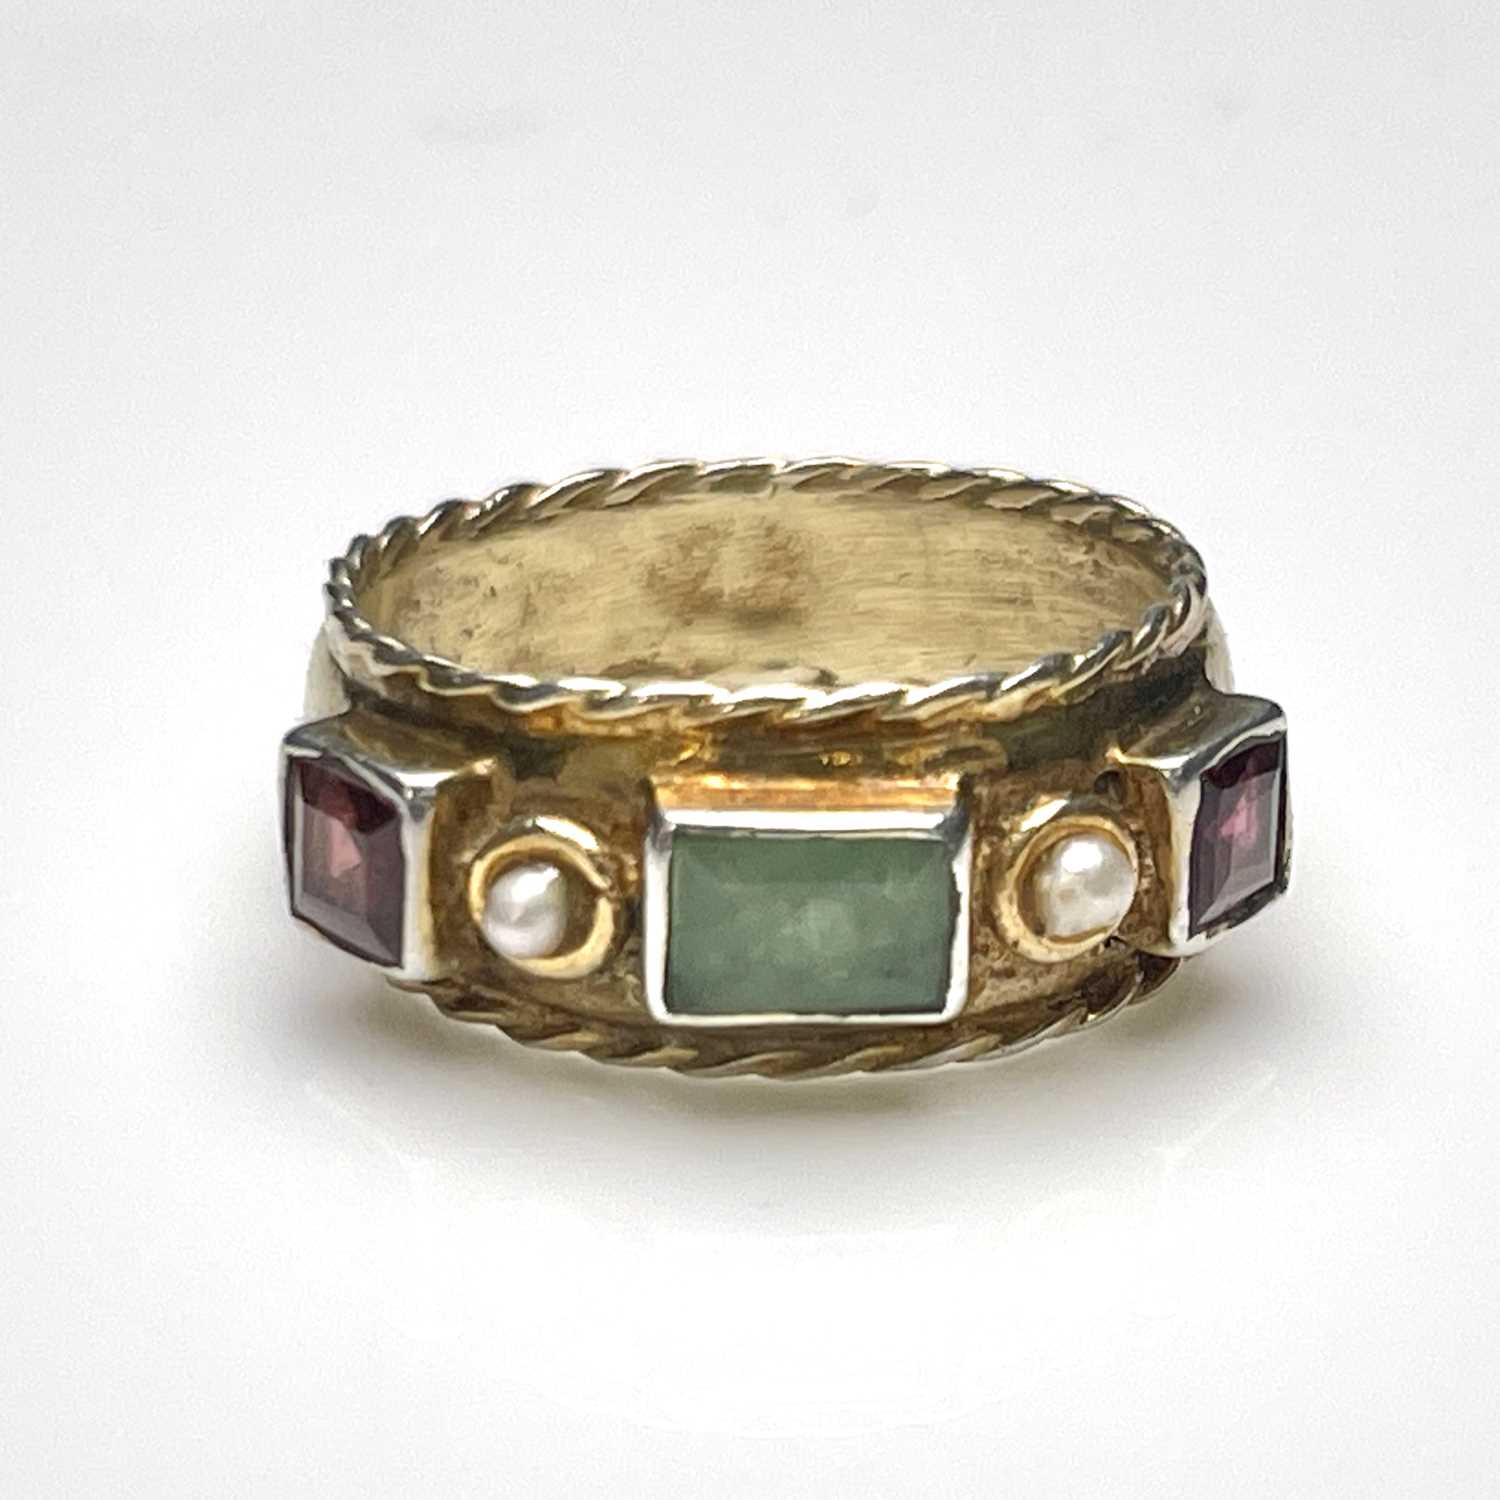 A Byzantine Revival silver gilt and gem set ring, the band with ropetwist borders, set with a